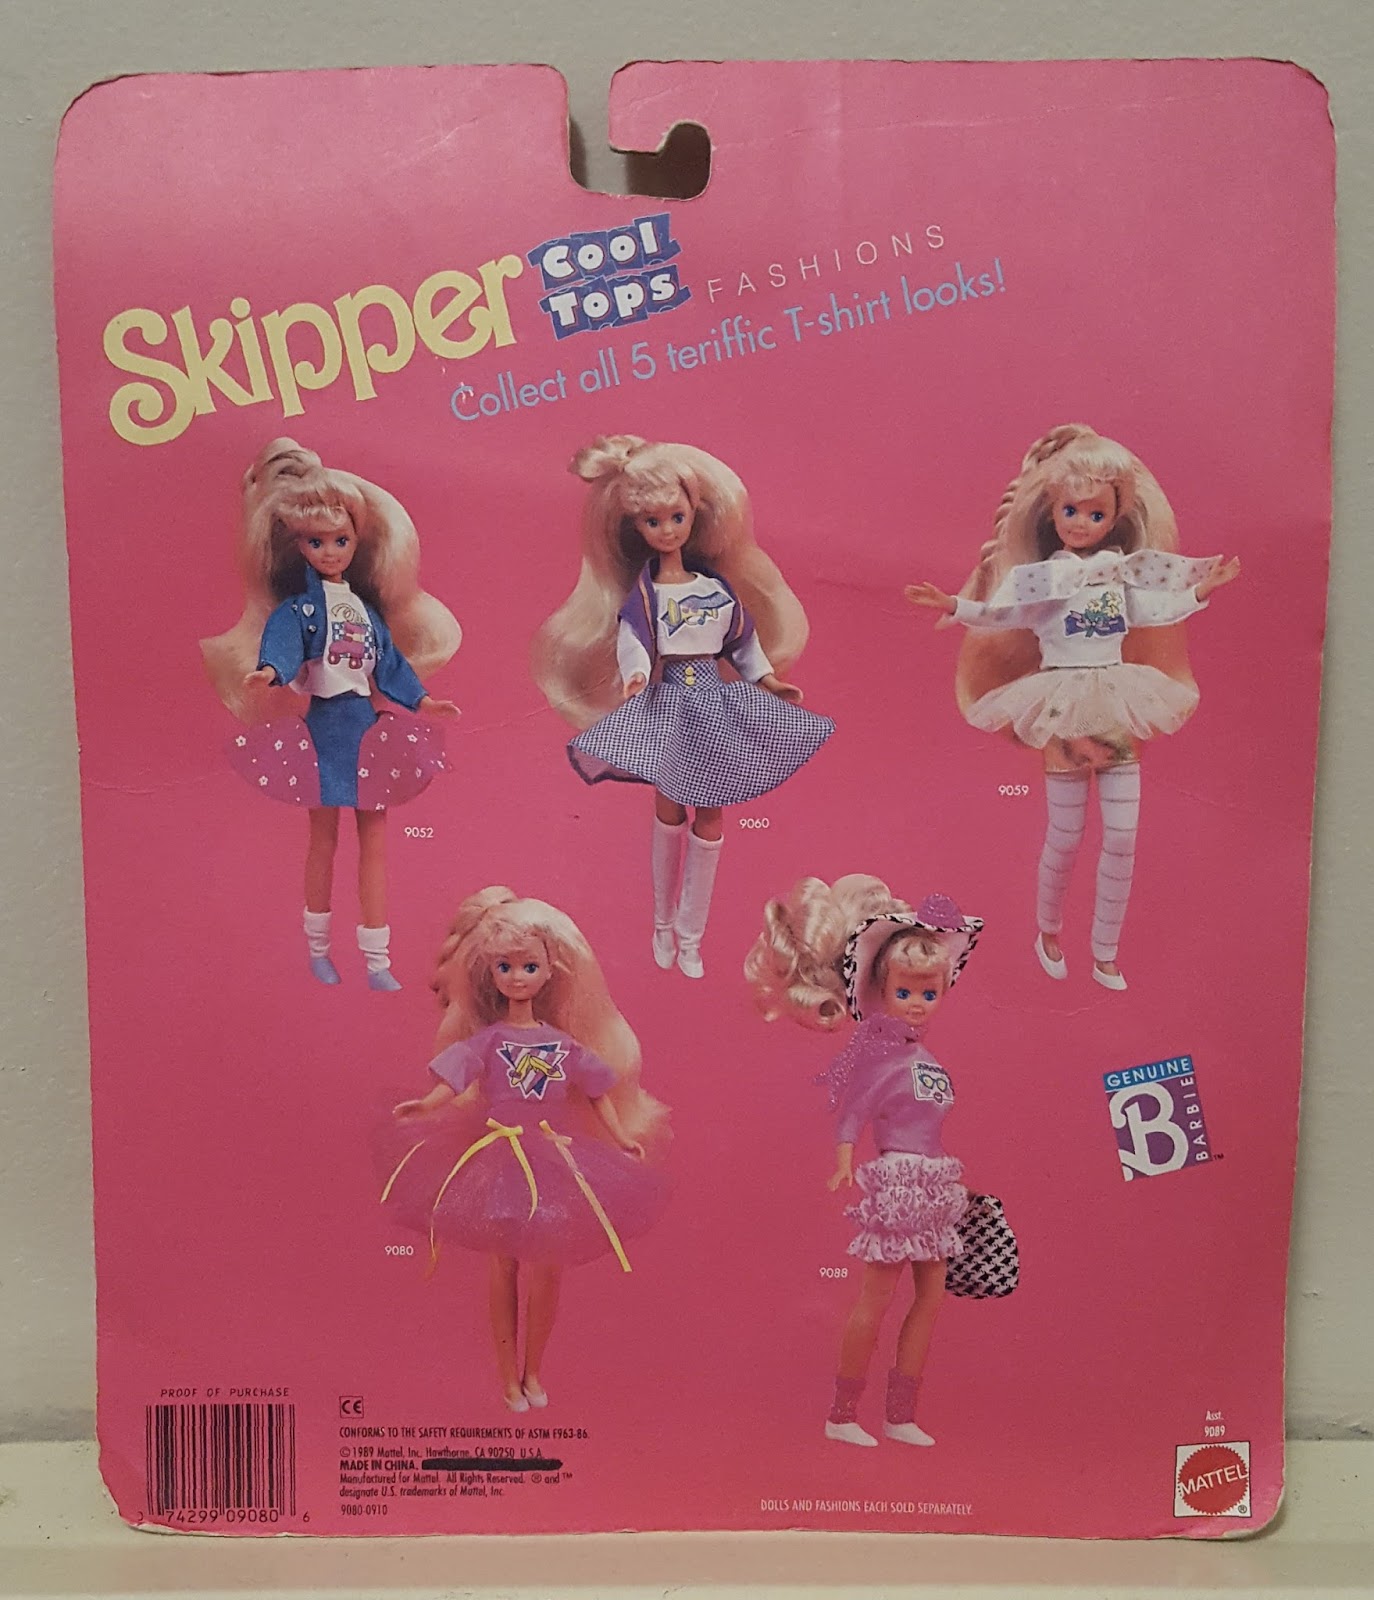 Confessions of a Dolly Dolly Dress Discussion: Cool Skipper